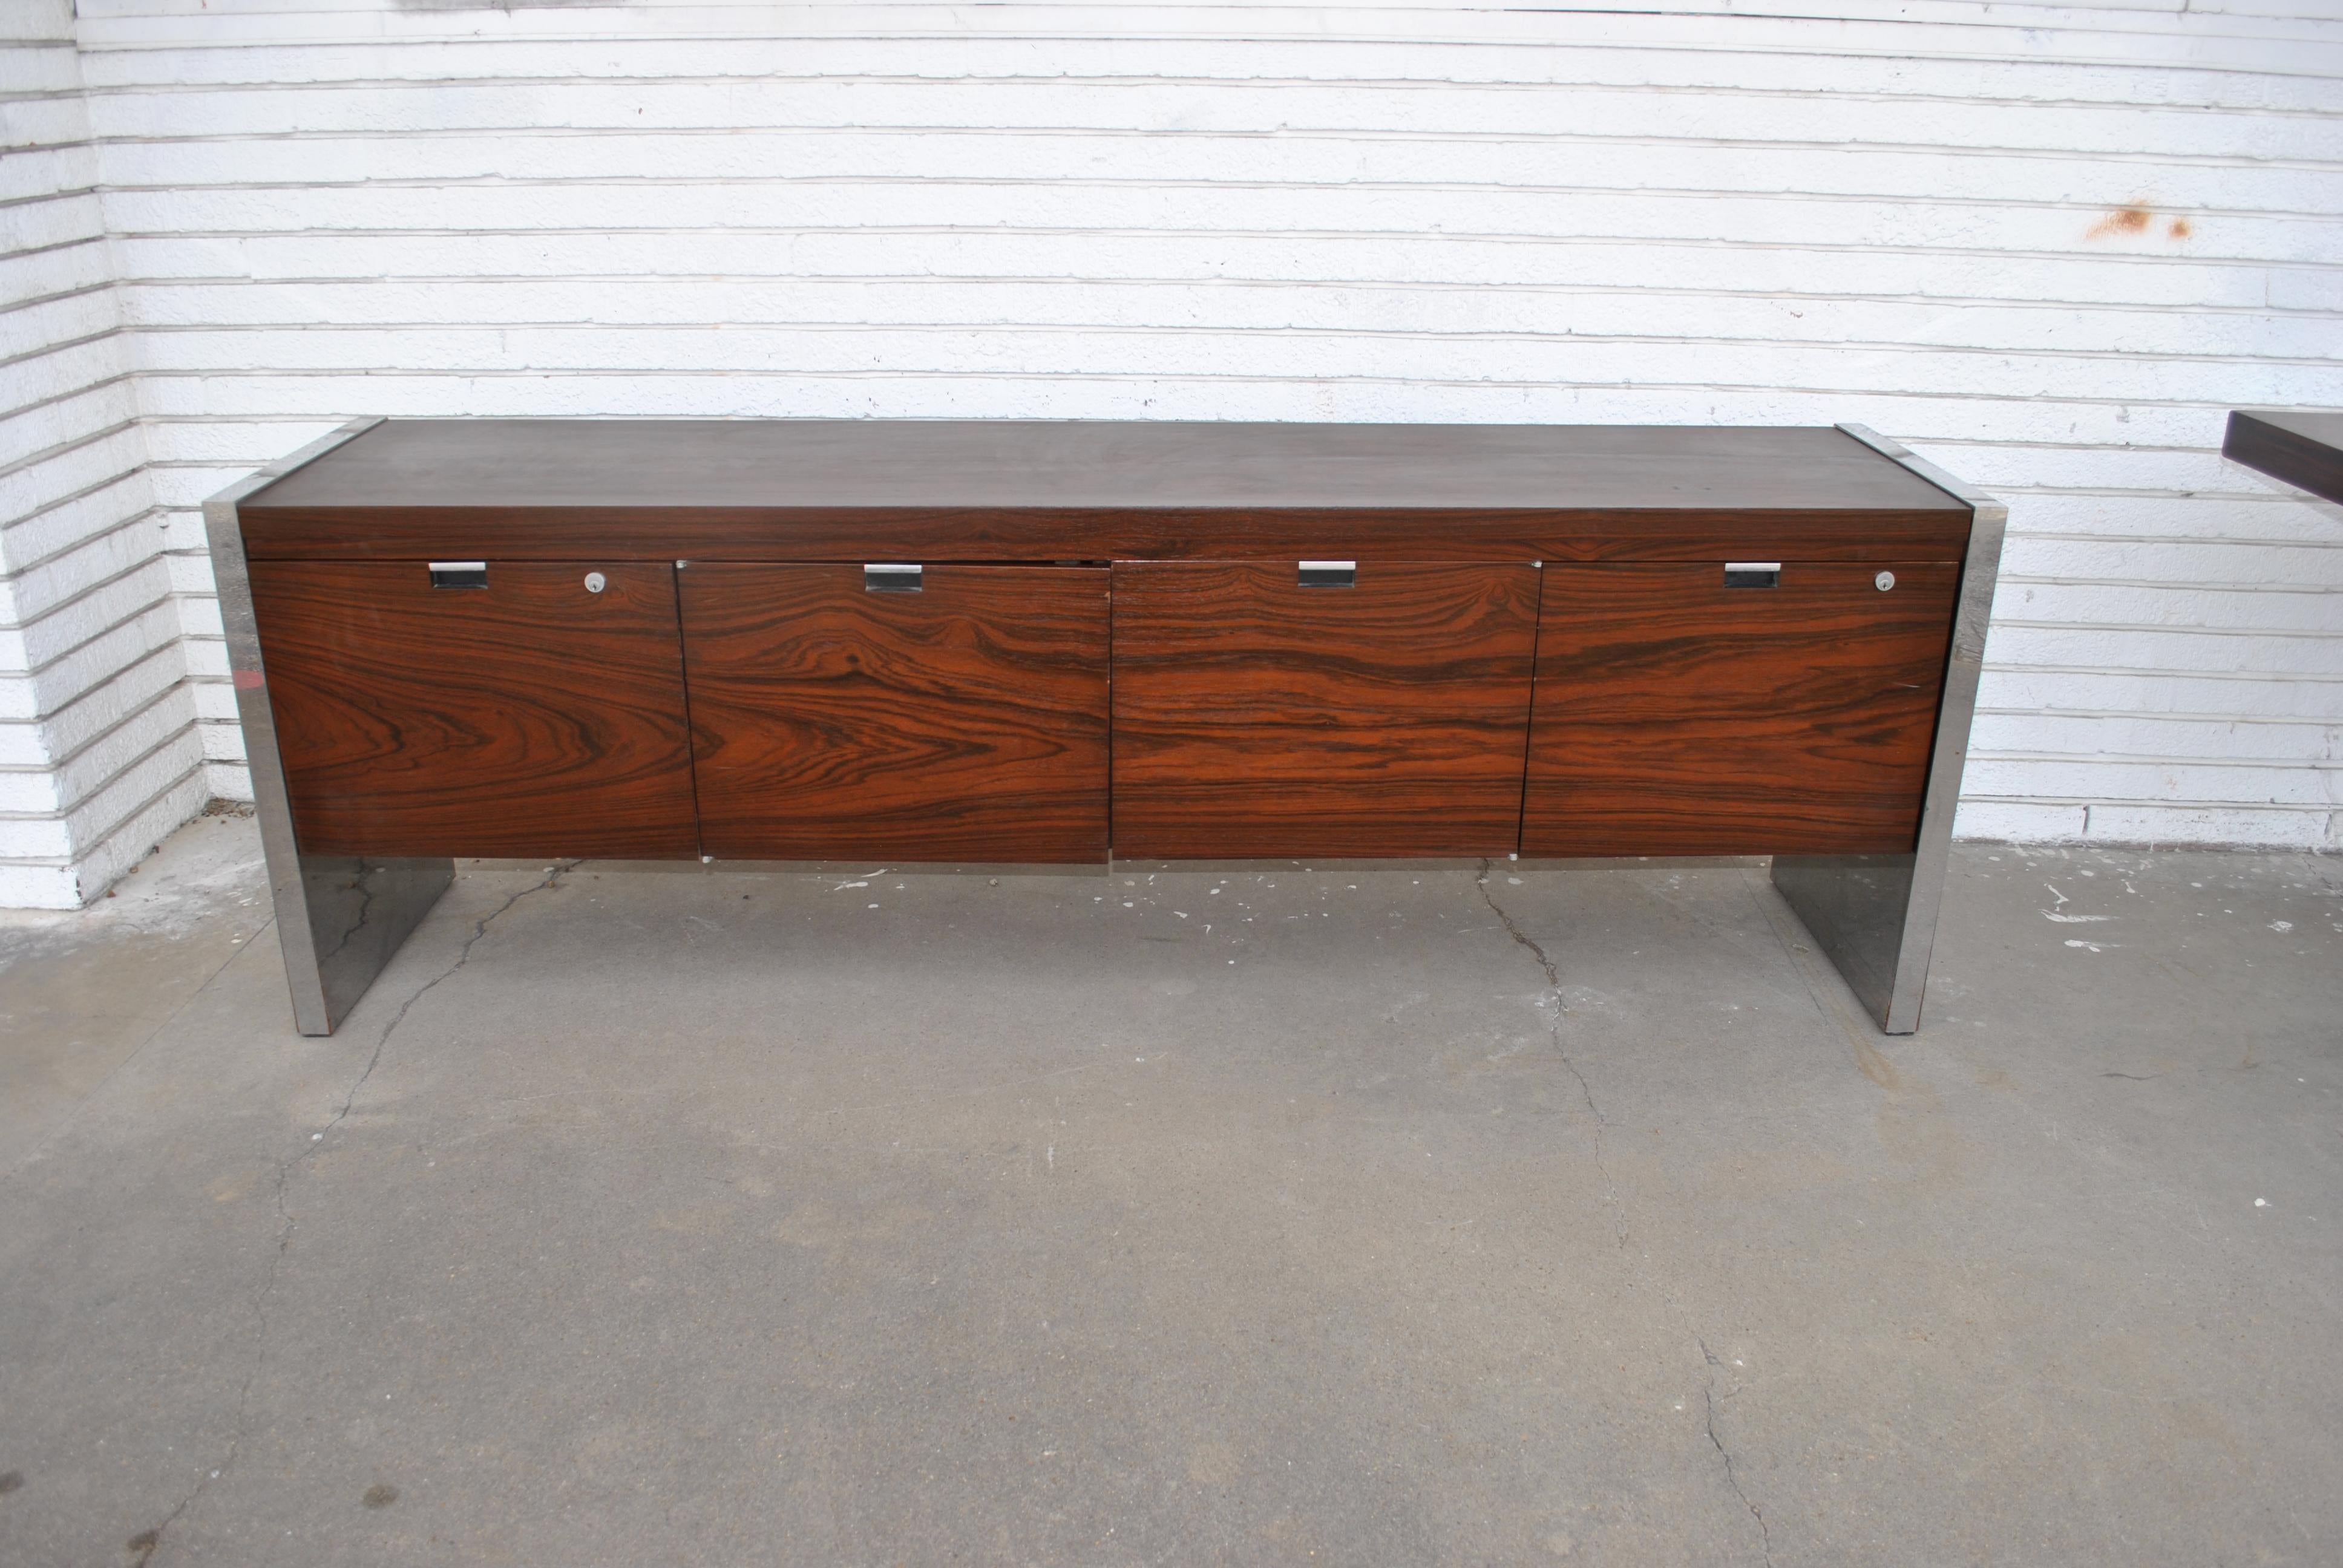 Roger Sprunger for Dunbar rosewood and chrome executive Credenza,
1970s.

A Mid-Century Modern rosewood and chrome credenza with generous storage and shelving.
Six drawers and two file cabinets. Rich rosewood case with polished chrome